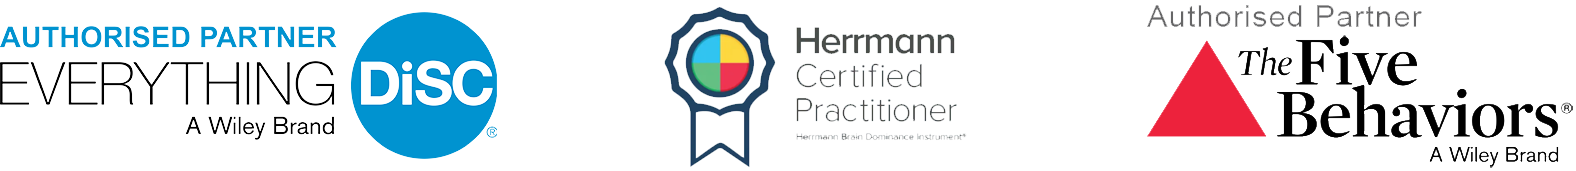 Everything DiSC Authrised Partner Logo and The Five Beahaviours Logo and Hermann Certifed Practitioner